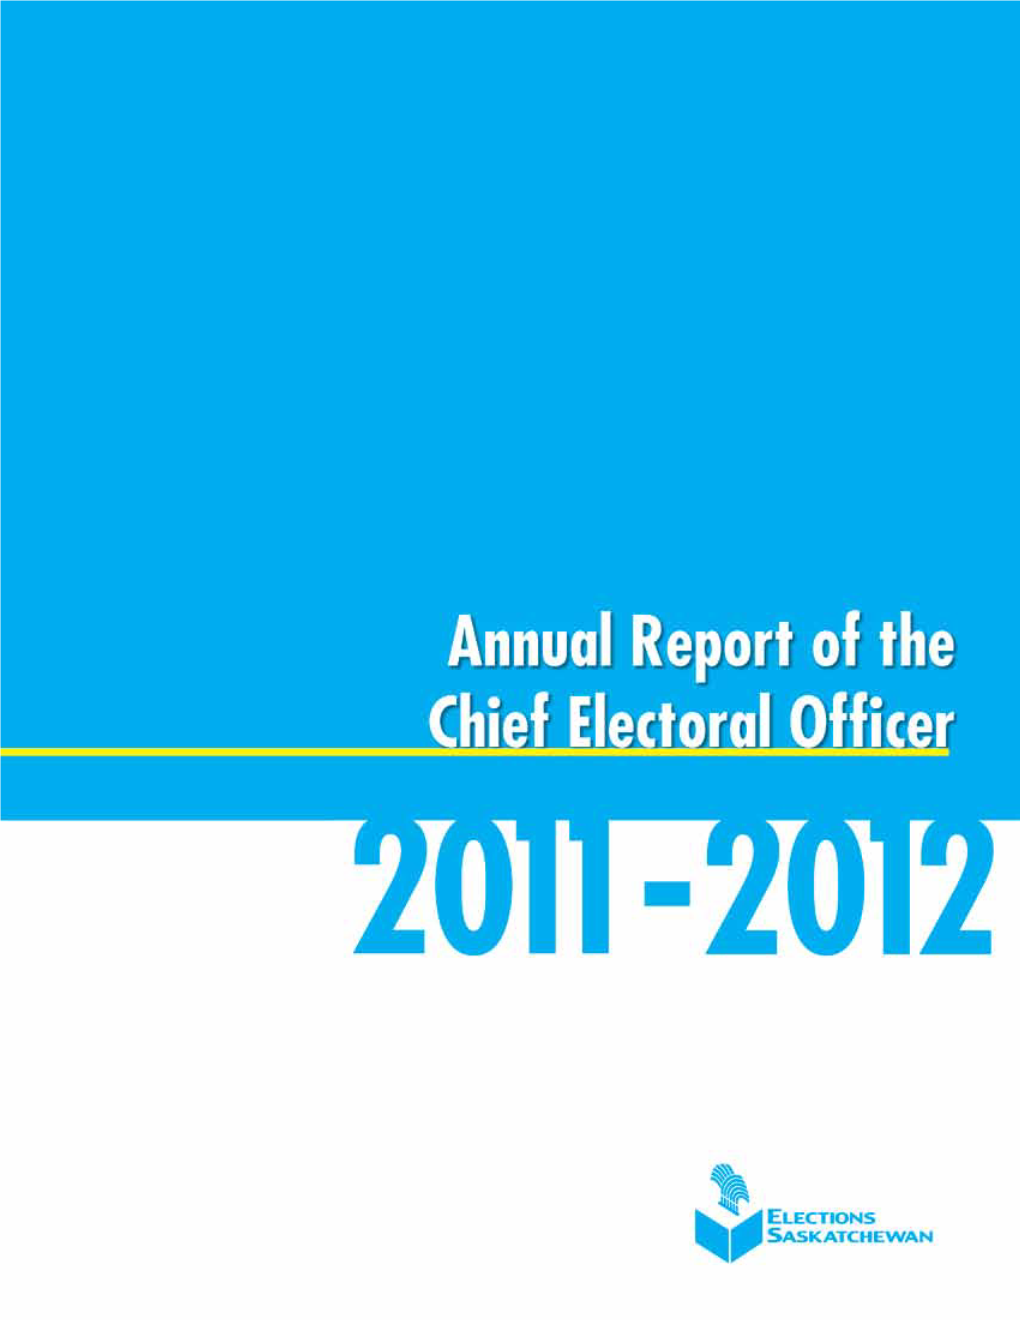 I. Message of the Chief Electoral Officer